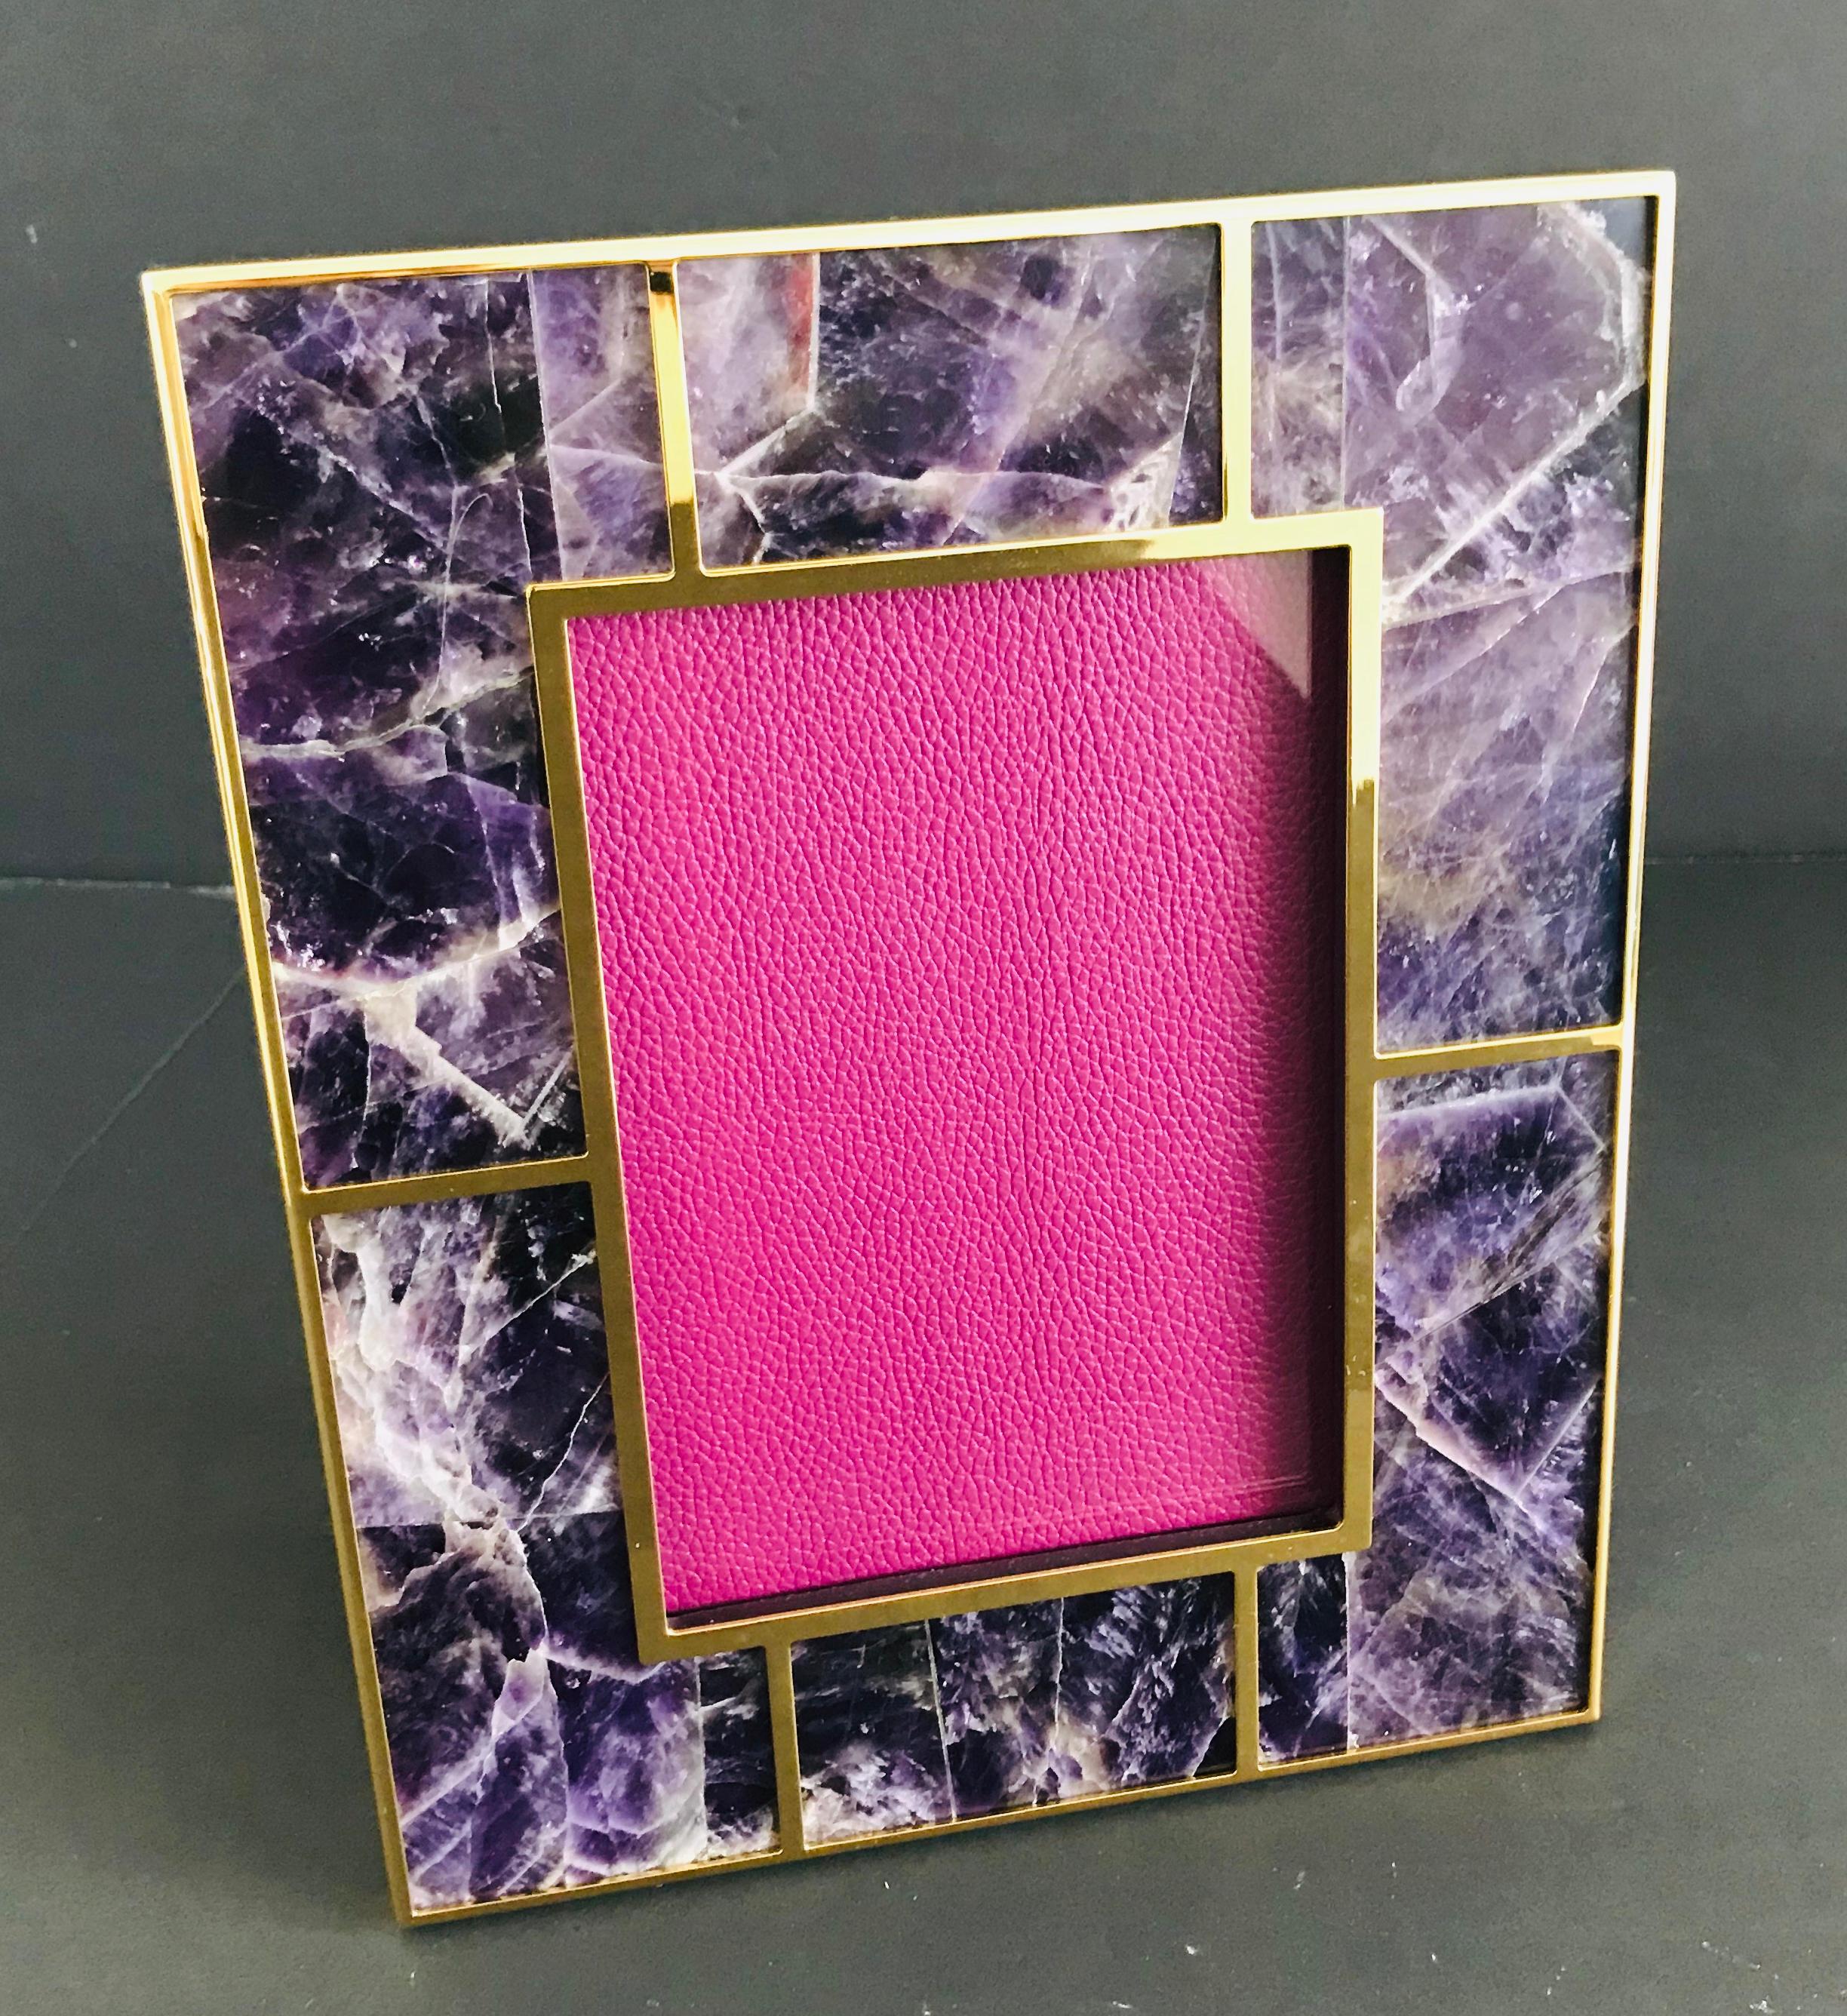 Amethyst gemstone and gold-plated picture frame by Fabio Ltd
Height: 10.5 inches / Width: 8.5 inches / Depth: 1 inch
Photo size: 5 inches by 7 inches
1 in stock in Palm Springs ON 20% OFF SALE for $1,999 !!!
Order Reference: FABIOLTD PF40
This piece